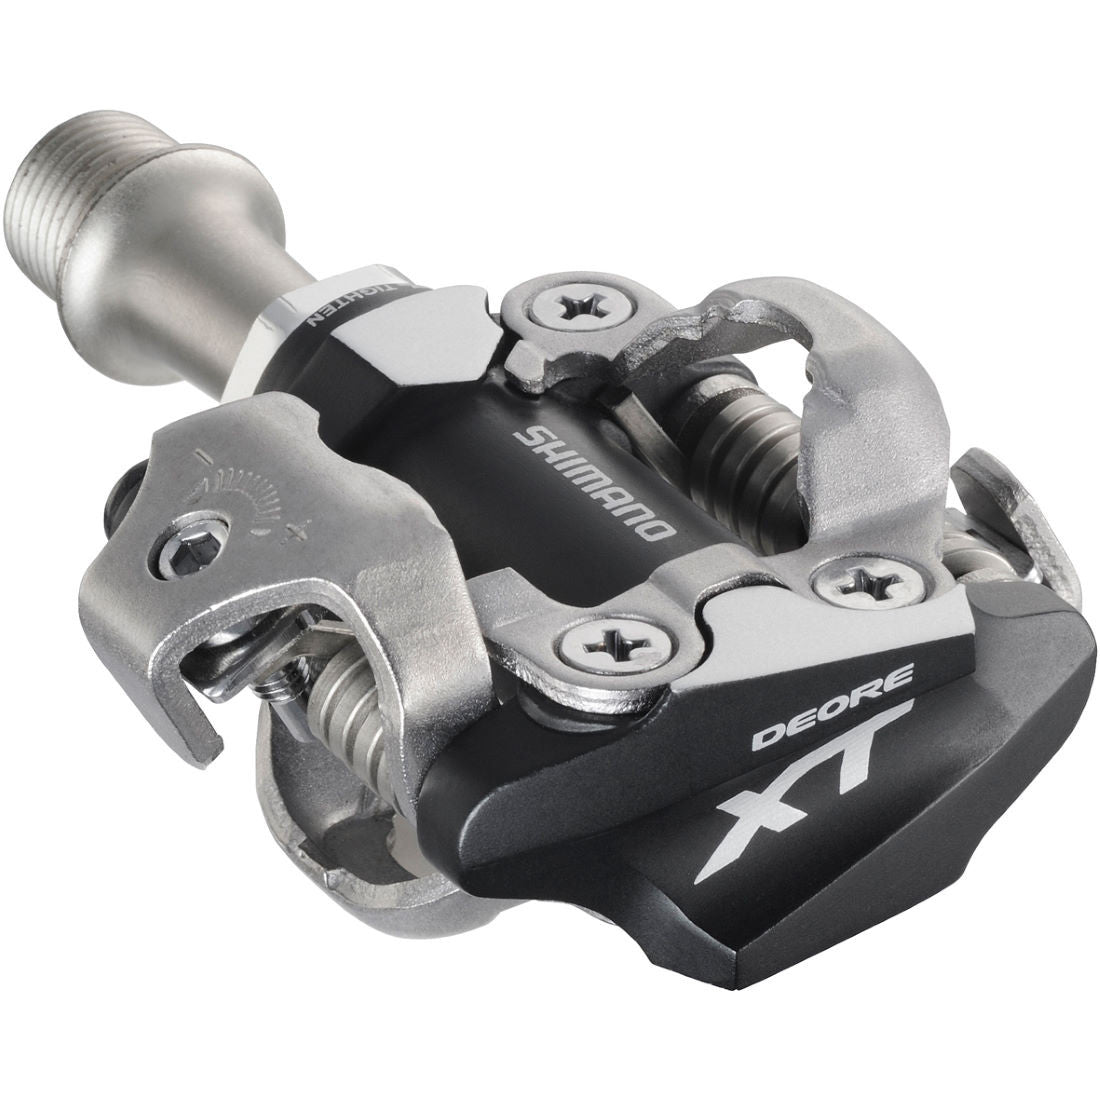 Shimano Deore XT PD-M8000 SPD Mountain Pedals